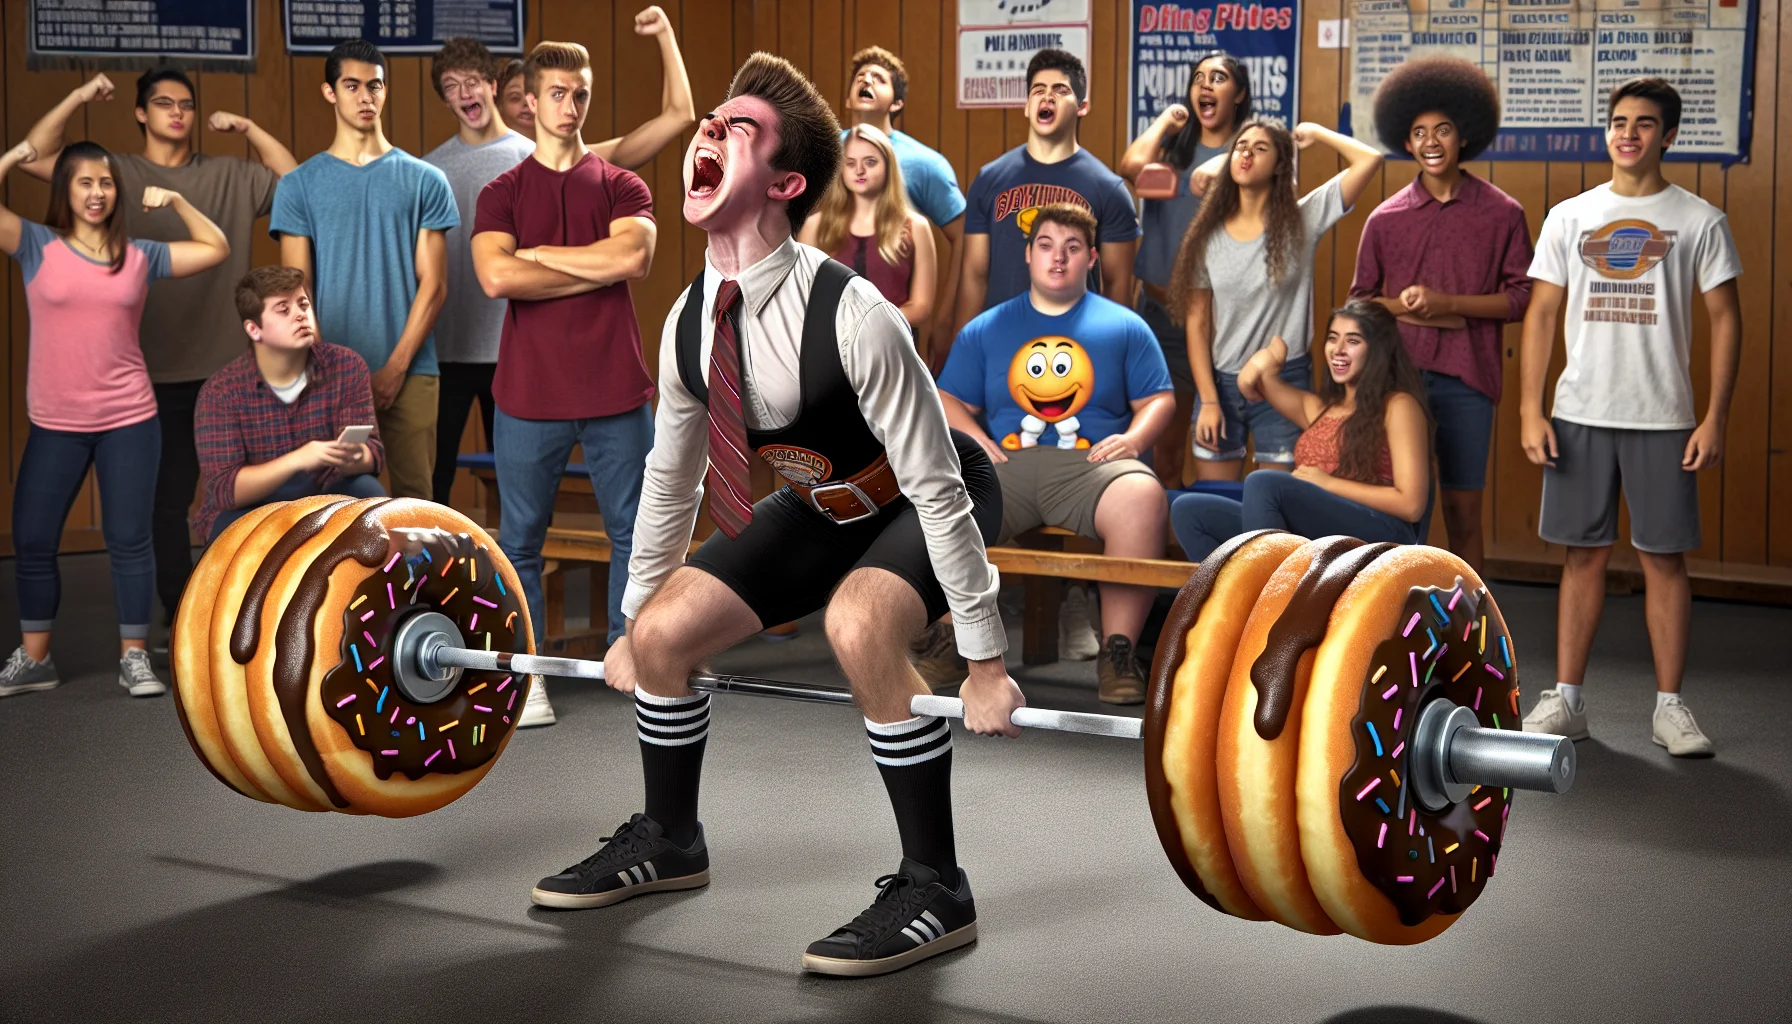 Create a humorous and lively image of a powerlifting competition from a high school athletics association. The scene unfurls in the gym, with a visibly strained yet passionate teenager performing a mighty deadlift, grit and determination etched on their face. In a quirky twist, the barbell is not loaded with traditional weights, but with oversized donuts! On the sidelines, a mixed crowd of fellow students, both male and female, from different descents such as Caucasian, Hispanic, and Middle-Eastern, watch in amusement and cheer on. Use this scene to artistically emphasize the importance of exercise and physical effort.